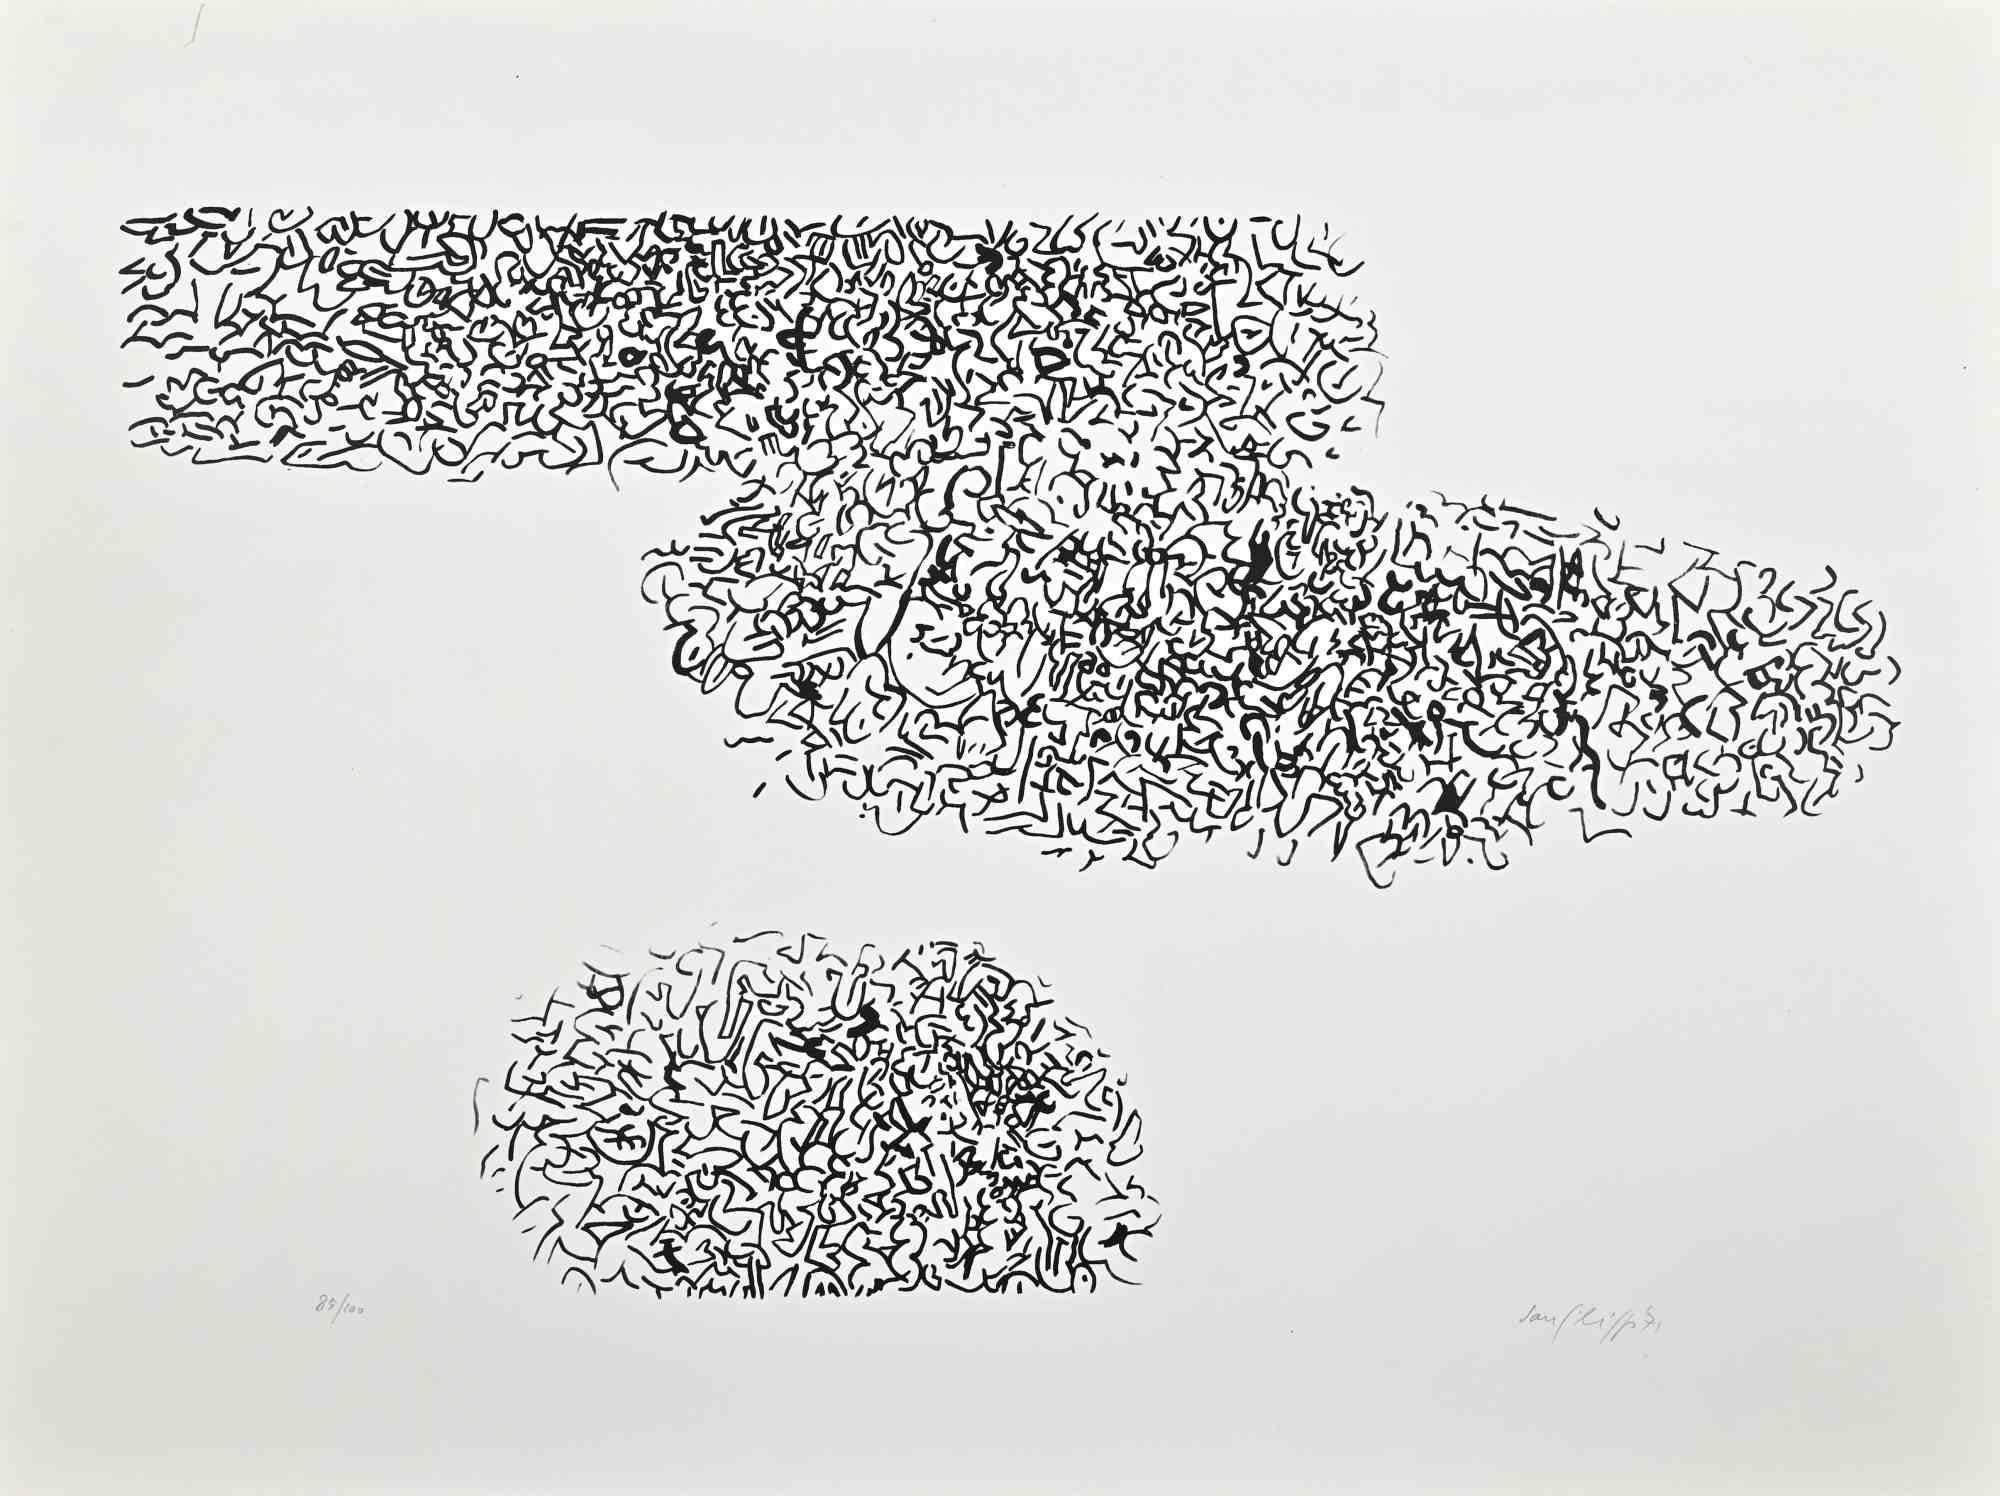 Abstract Composition is a lithograph realized by Antonio Sanfilippo in 1971.

Hand-signed and dated in pencil on the lower right.

Numbered, edition of 100 prints.

Good conditions.

This artwork represents an abstract composition of the artist's